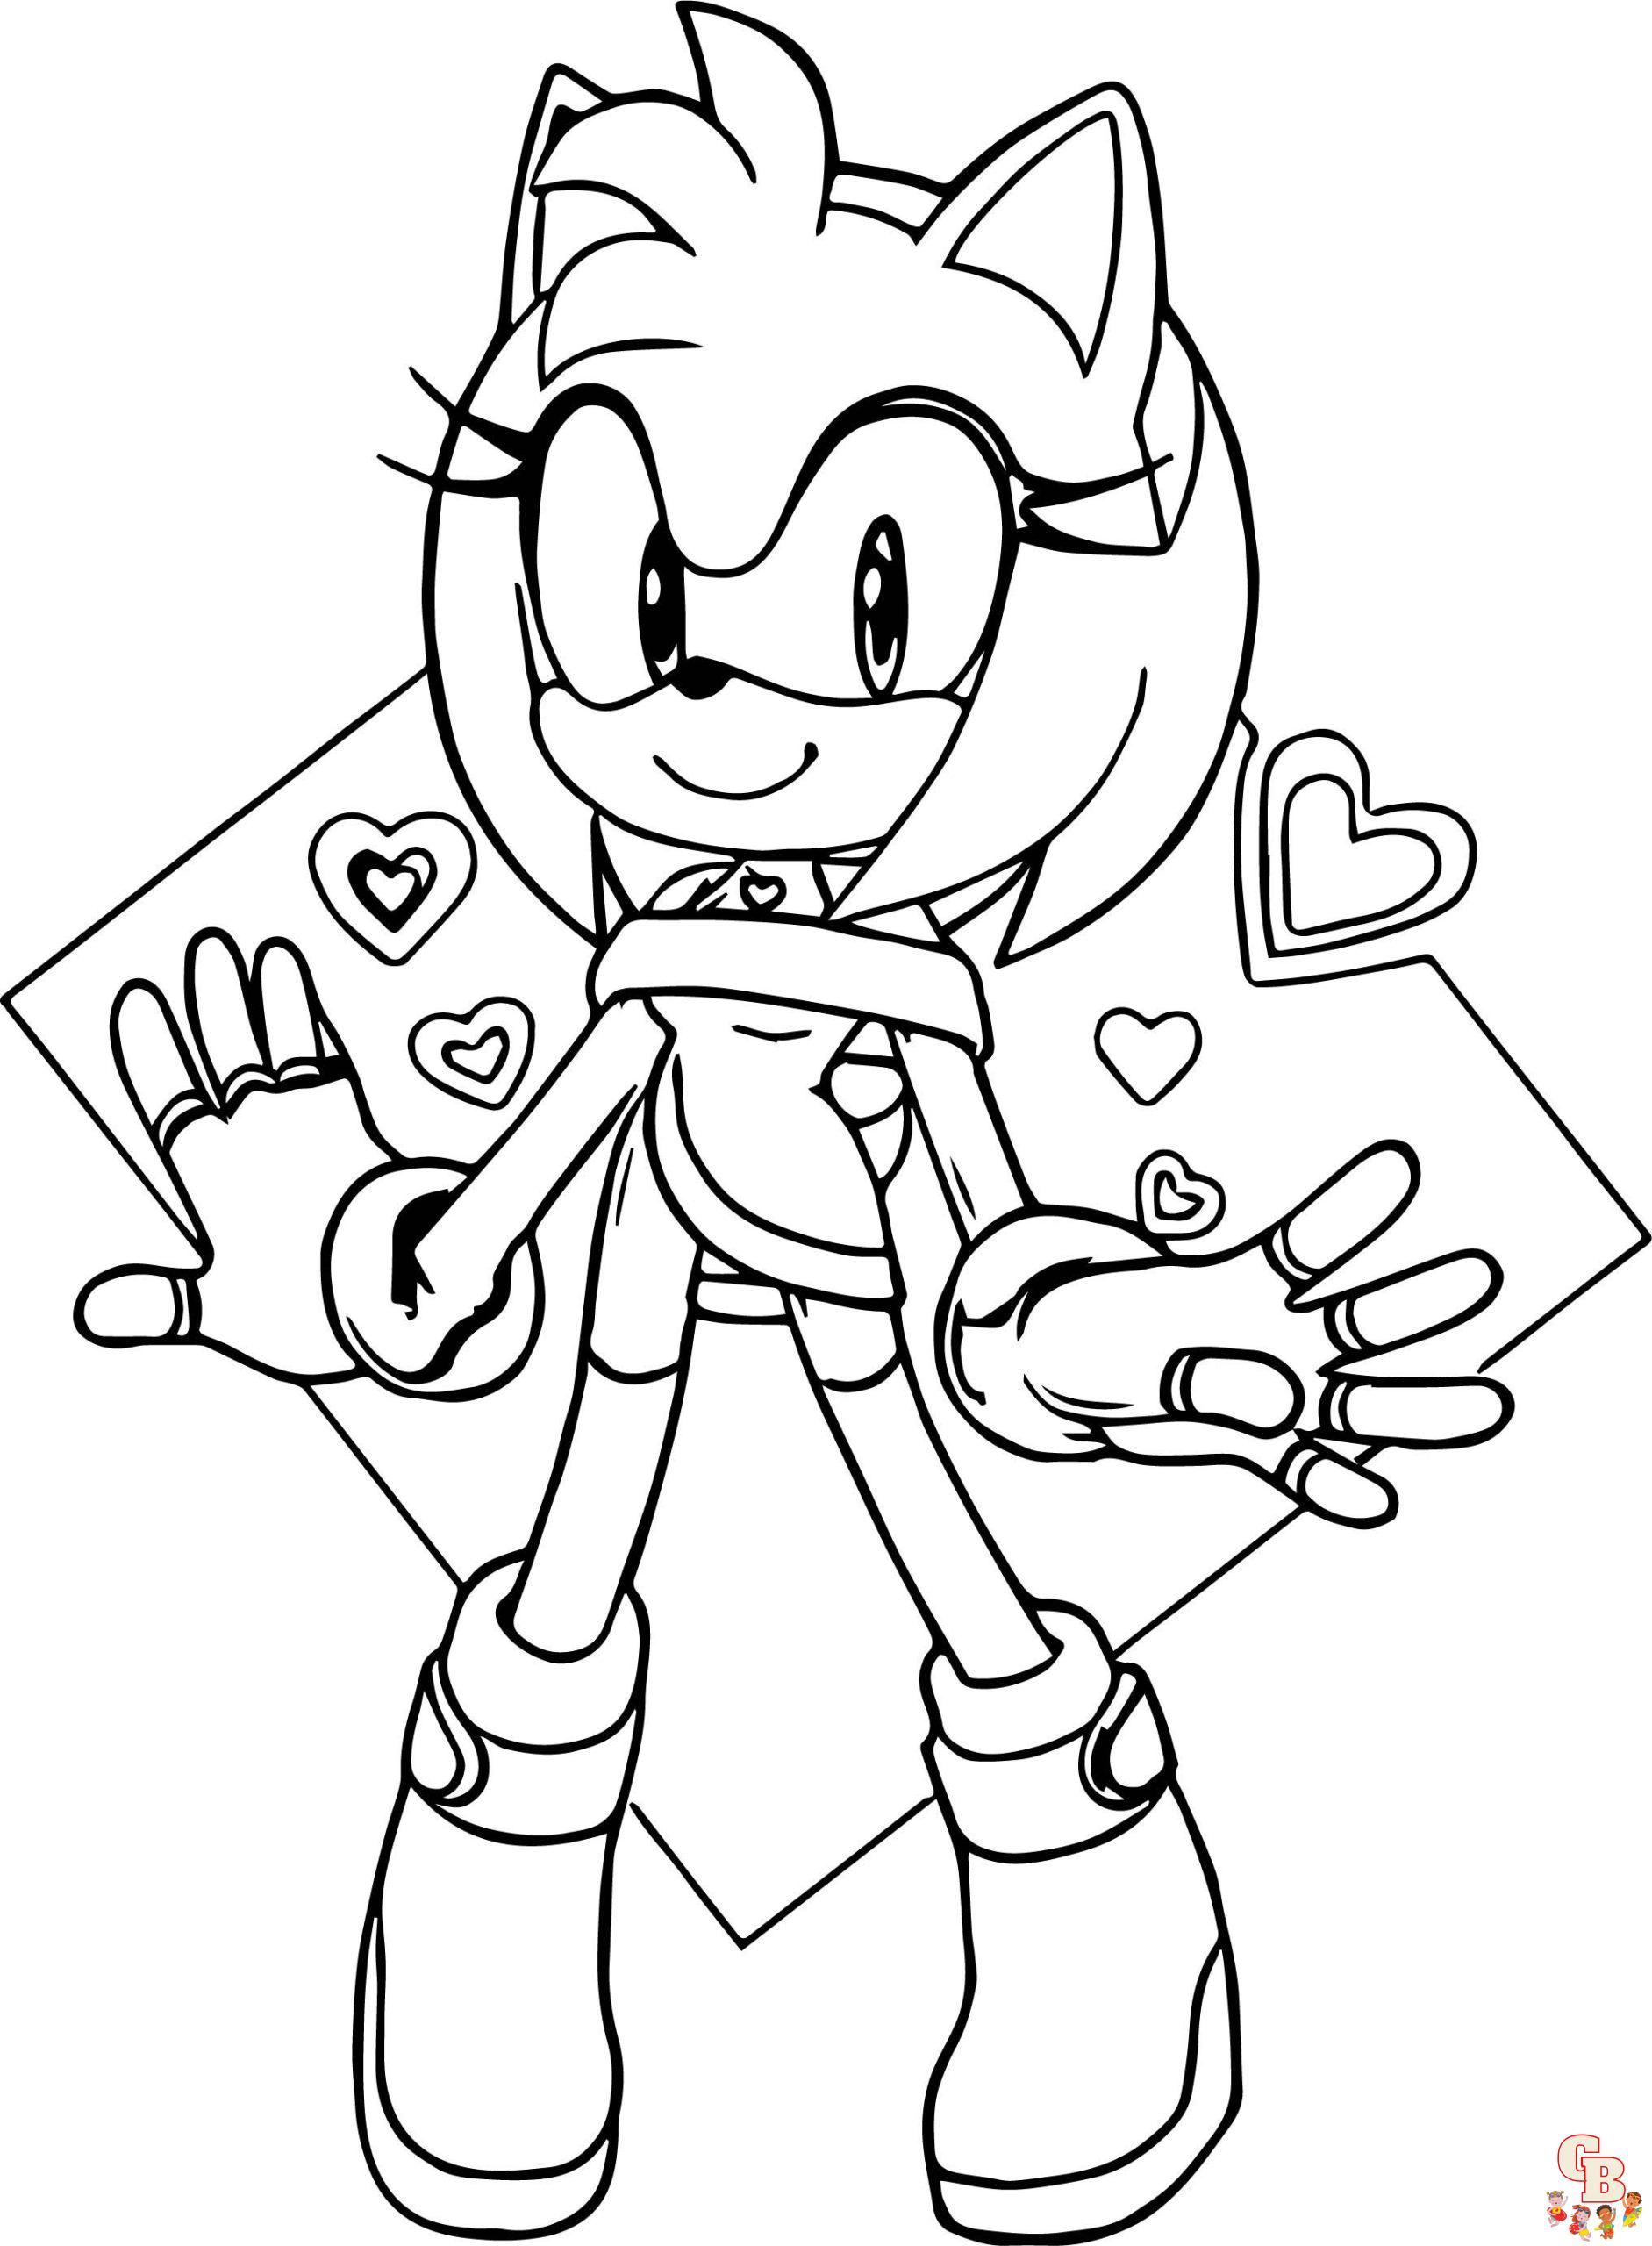 Amy Rose Say Sonic Coloring Page - Wecoloringpage.com in 2023  Pokemon  coloring pages, Pikachu coloring page, Coloring pages for boys